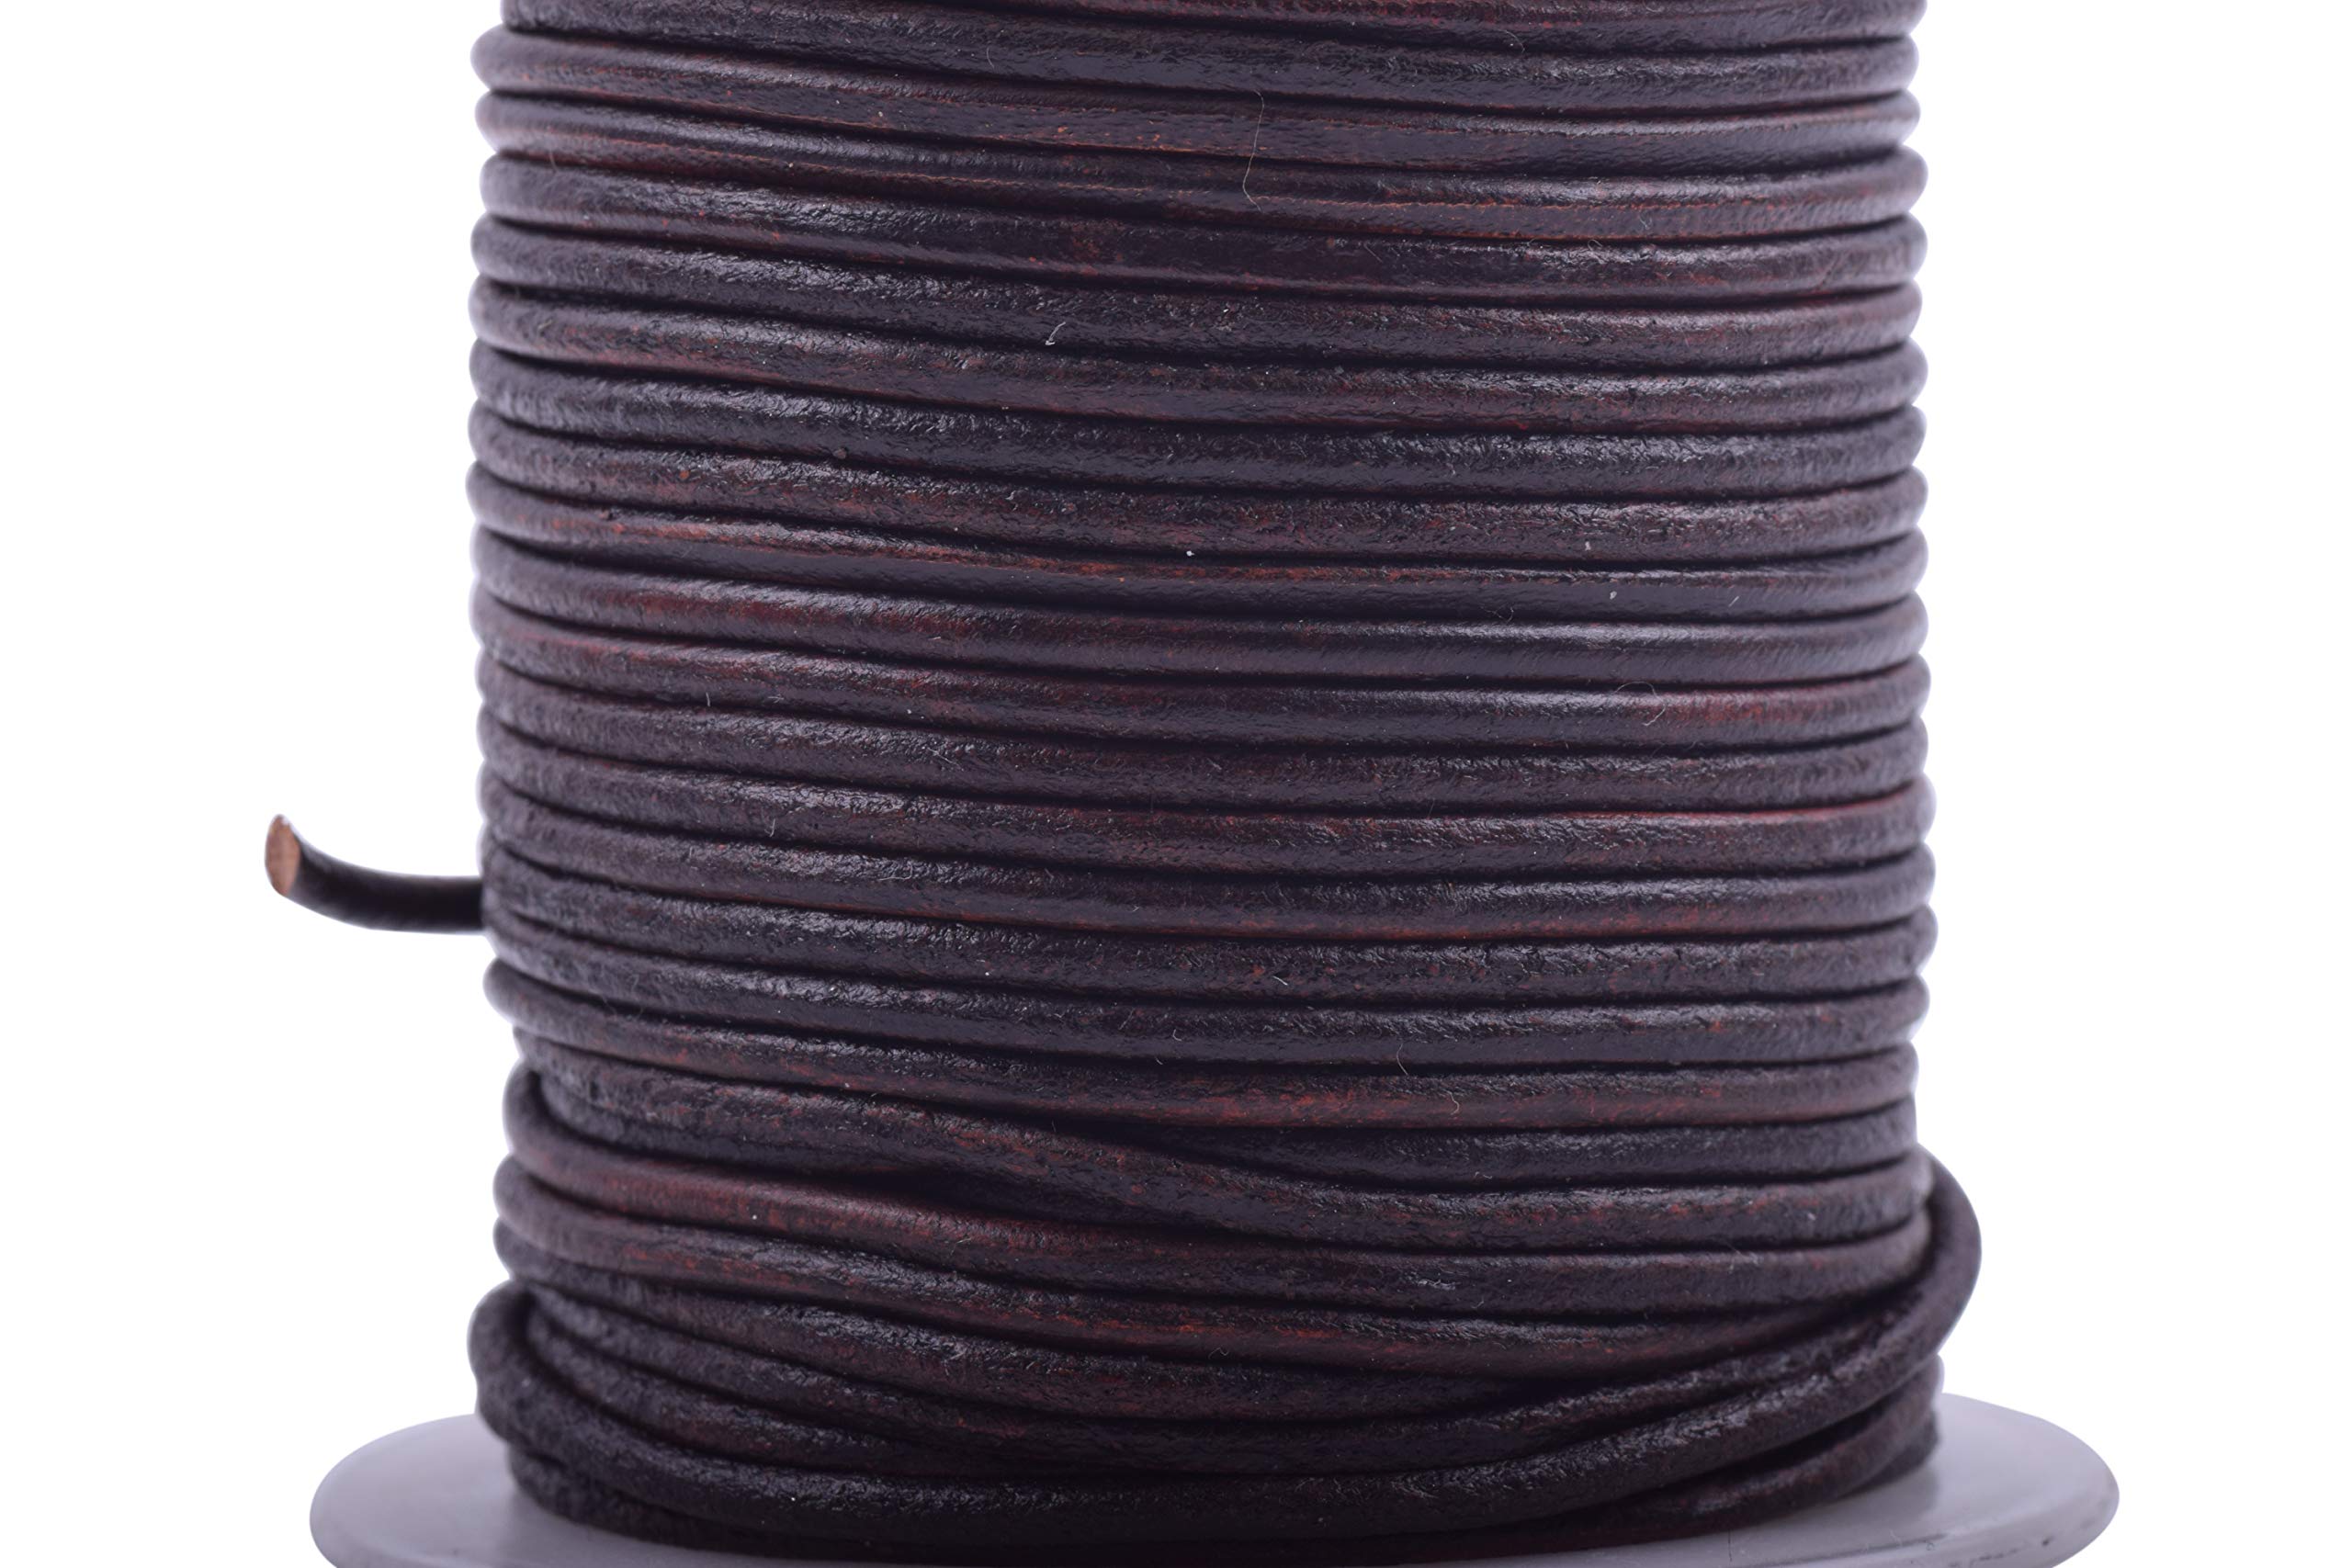  KONMAY Jewelry Real Leather Cord, 40 Yards 1.0mm Mixed Leather  String for Necklaces, Bracelets, Jewelry Making, Crafting and Braiding